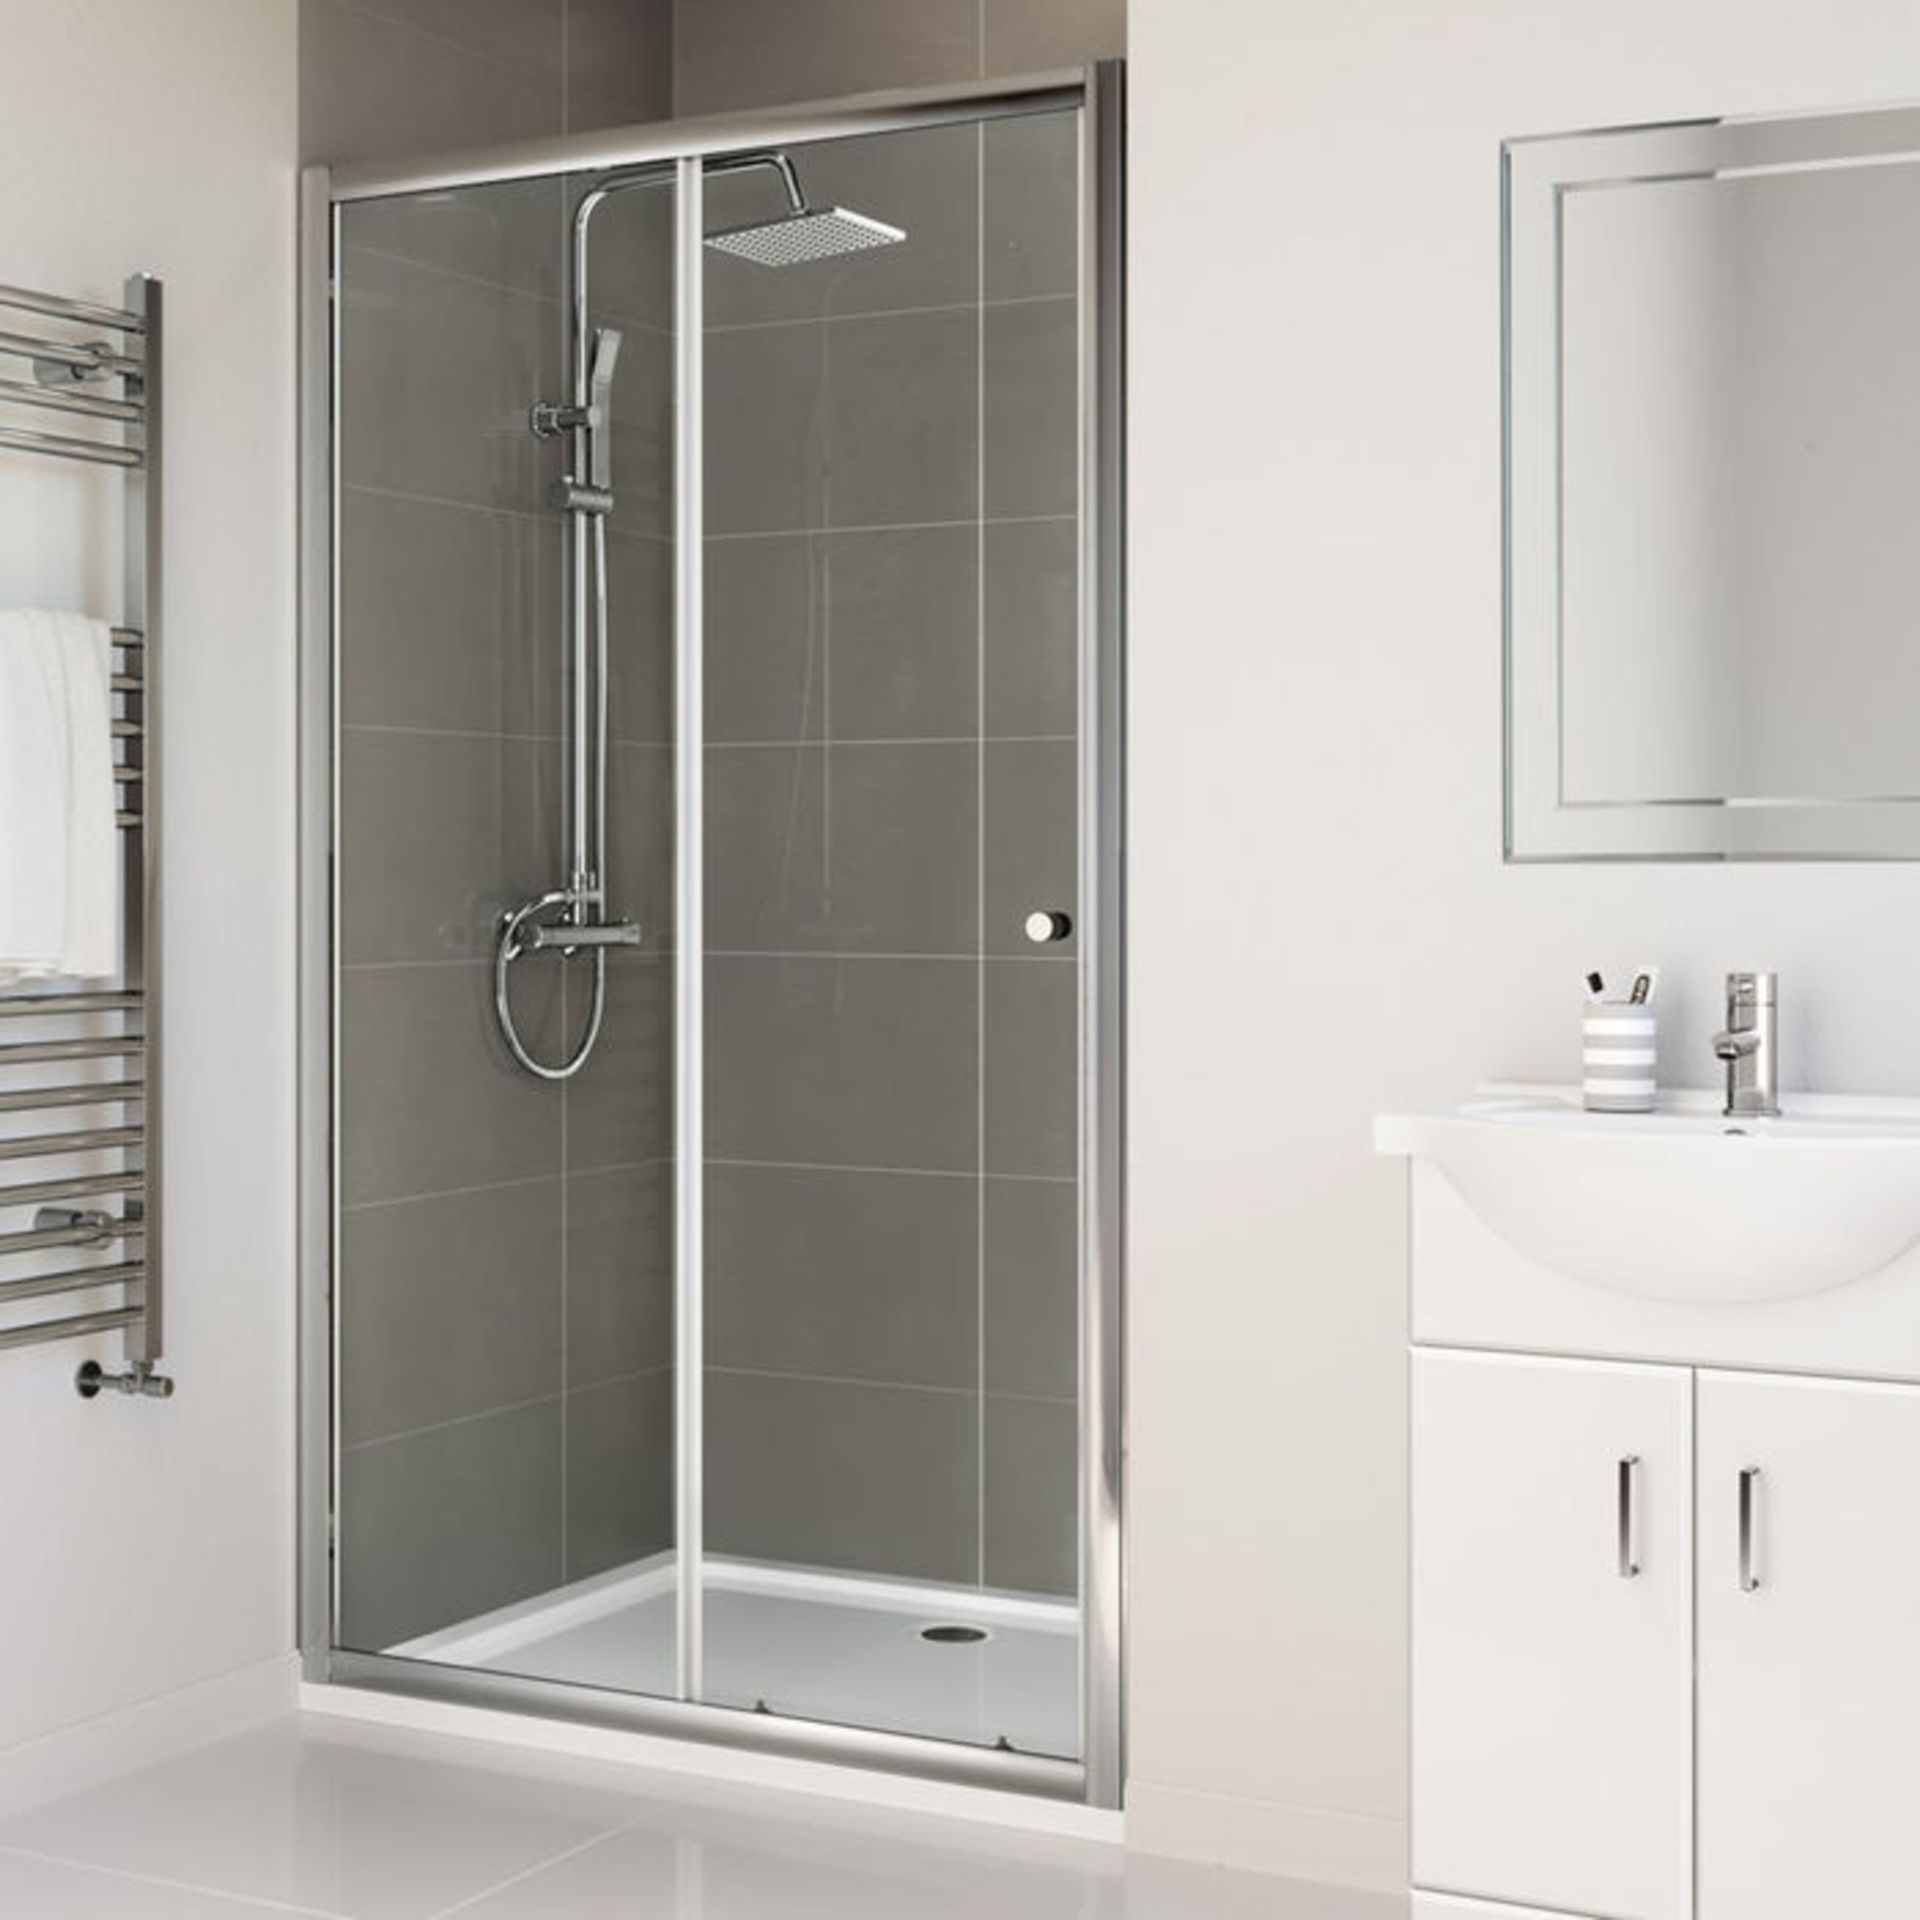 NEW Twyfords 1100mm - Elements Sliding Shower Door. RRP £399.99.4mm Safety Glass Fully waterp...